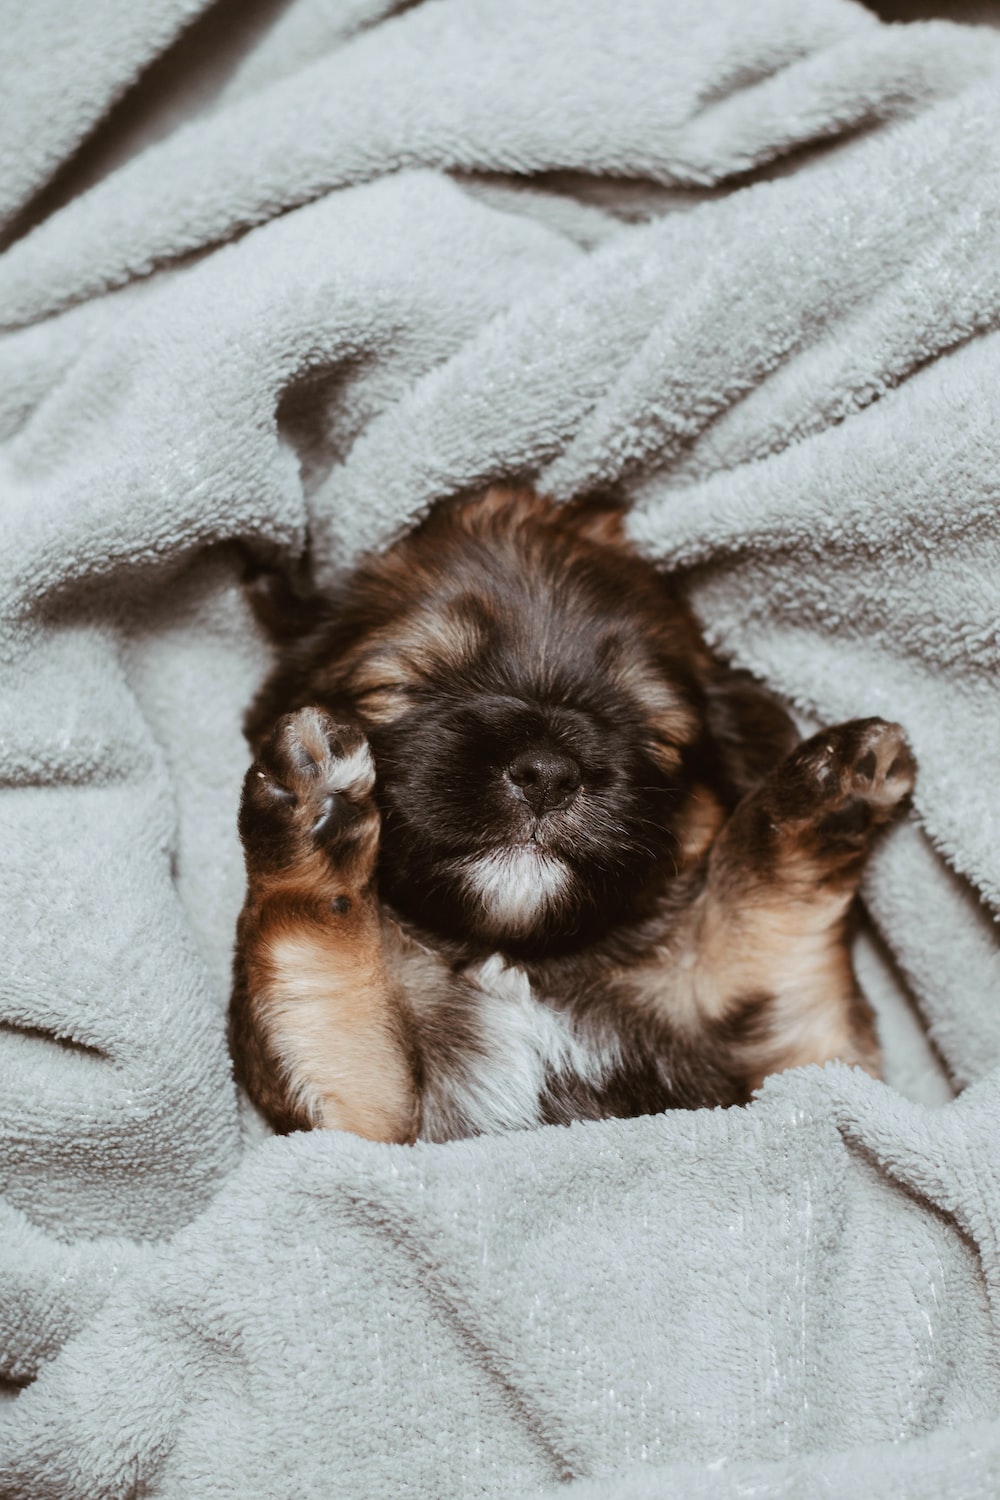 Sleeping Puppy Picture. Download Free Image